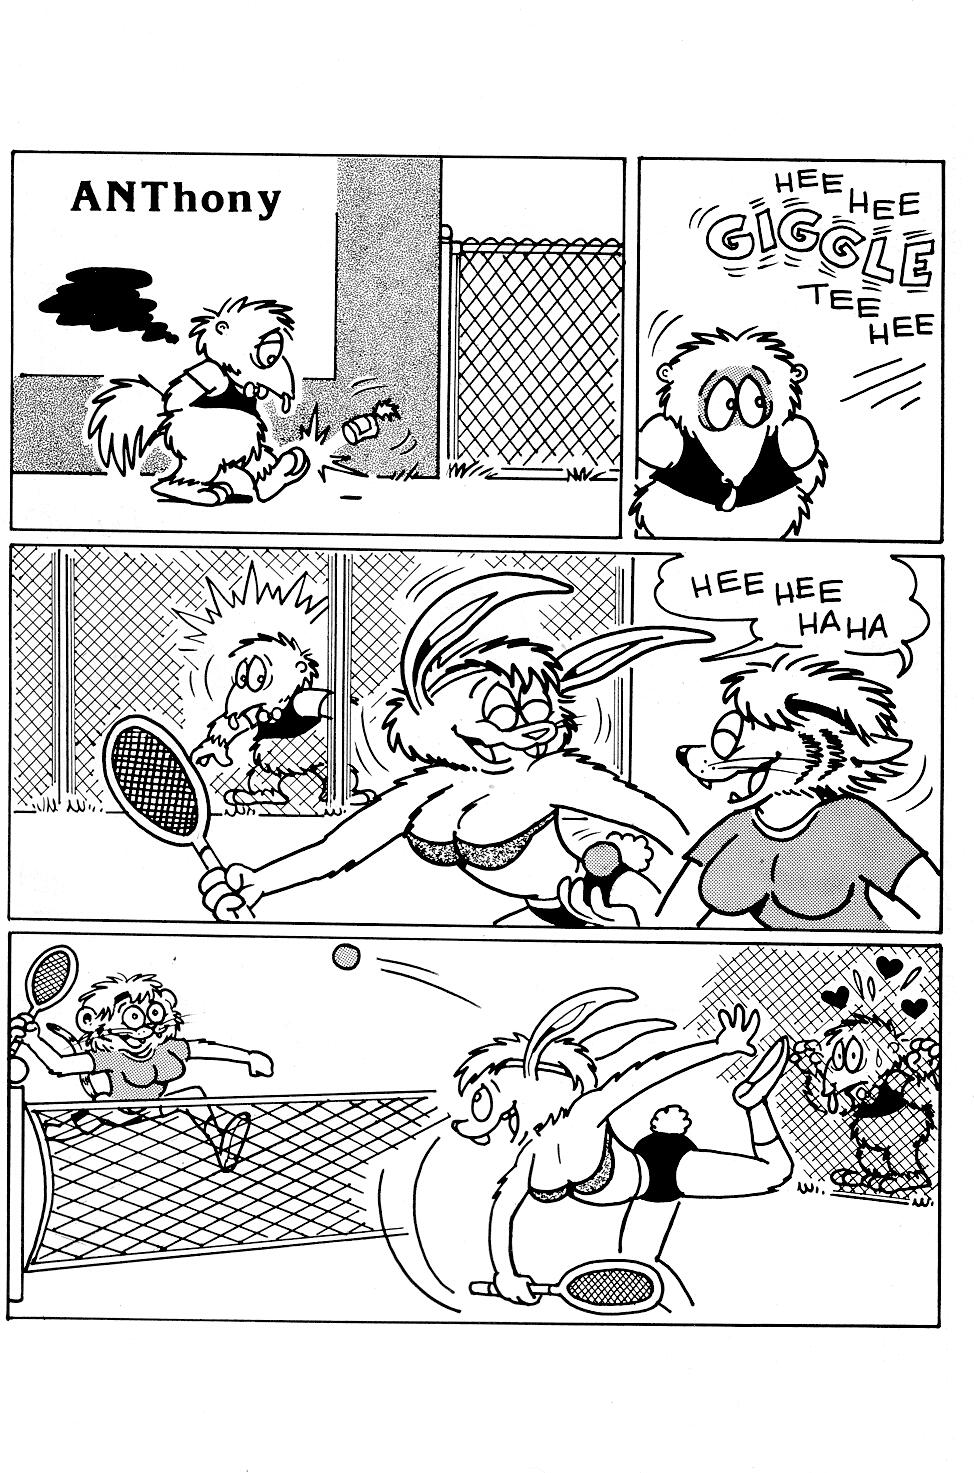 anteater anthony_(ant-eater_char) anthony_(ant-eater_comic) breasts comic furry monochrome tennis_court tennis_racket